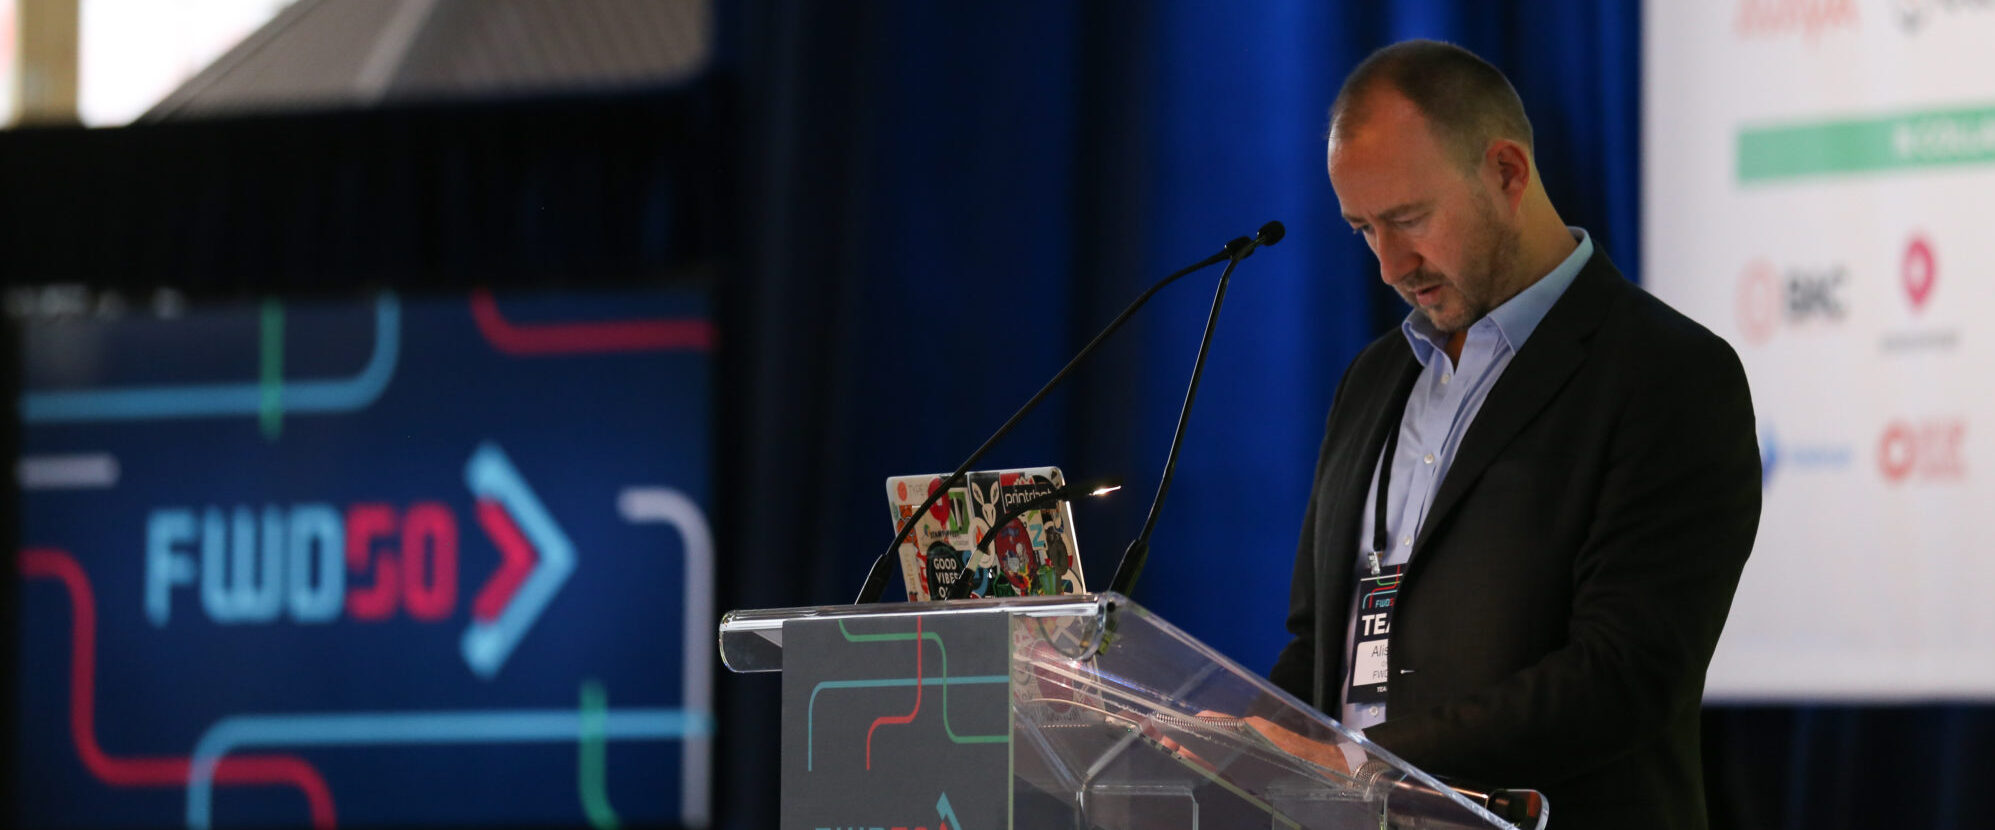 A picture of me standing at a lectern, working on a laptop computer, on the stage of the FWD50 digital government conference